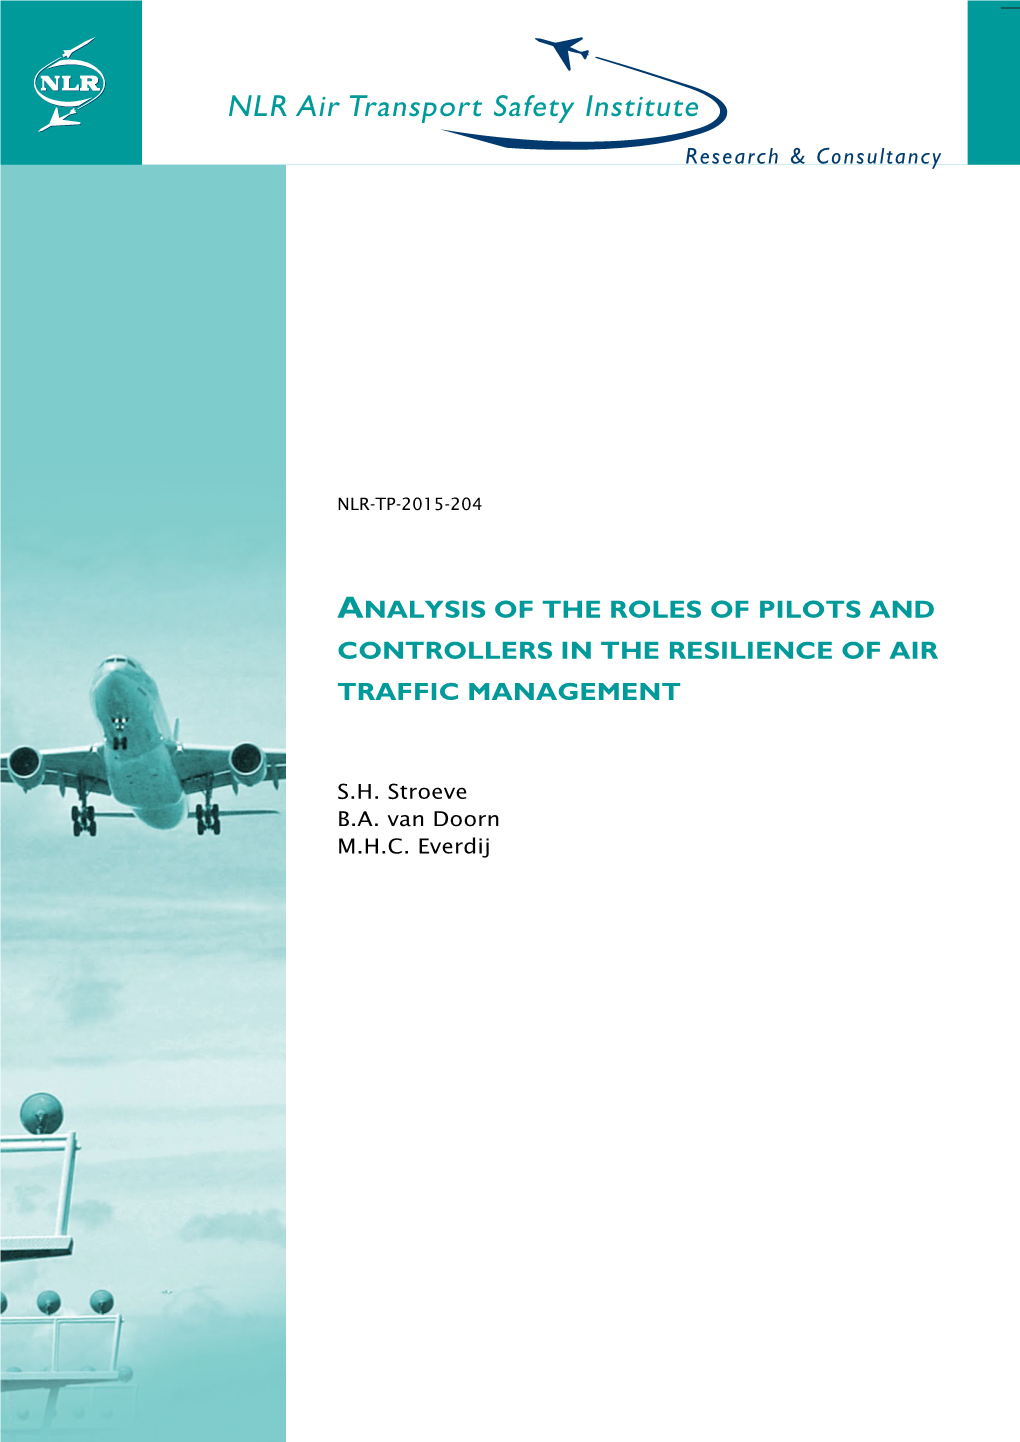 Analysis of the Roles of Pilots and Controllers in the Resilience of Air Traffic Management